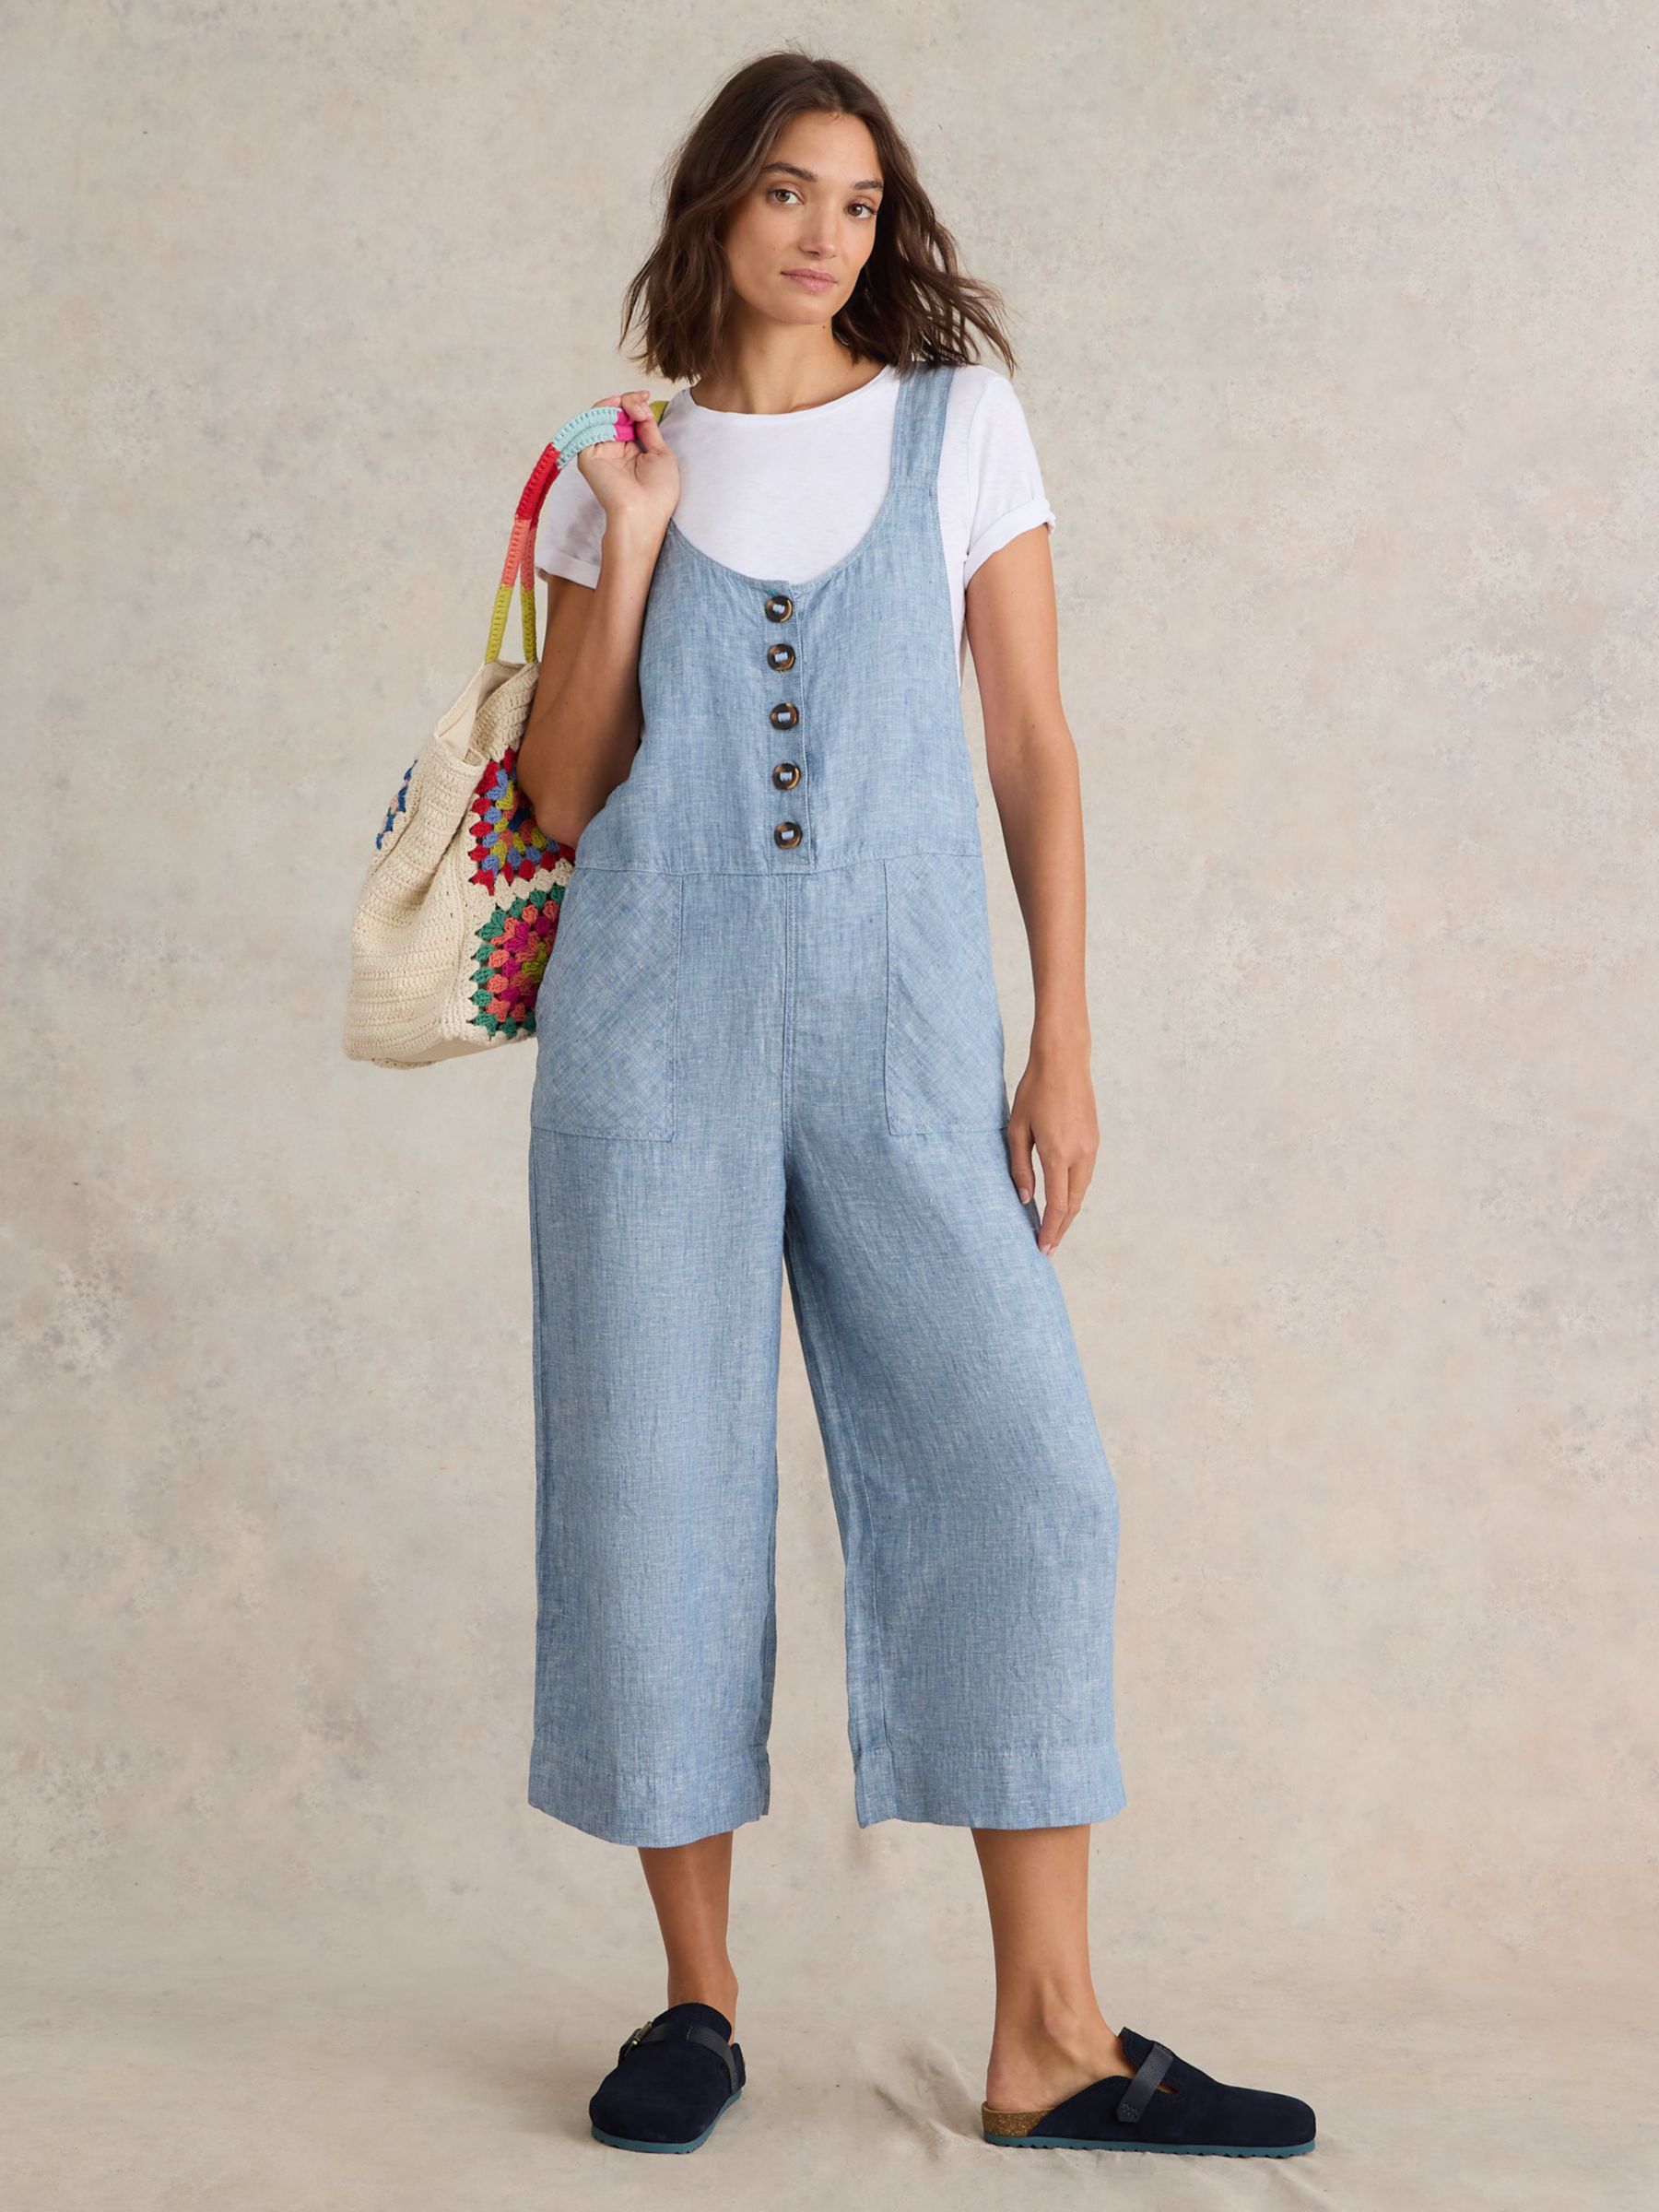 Women's Jumpsuits & Playsuits - Dungarees